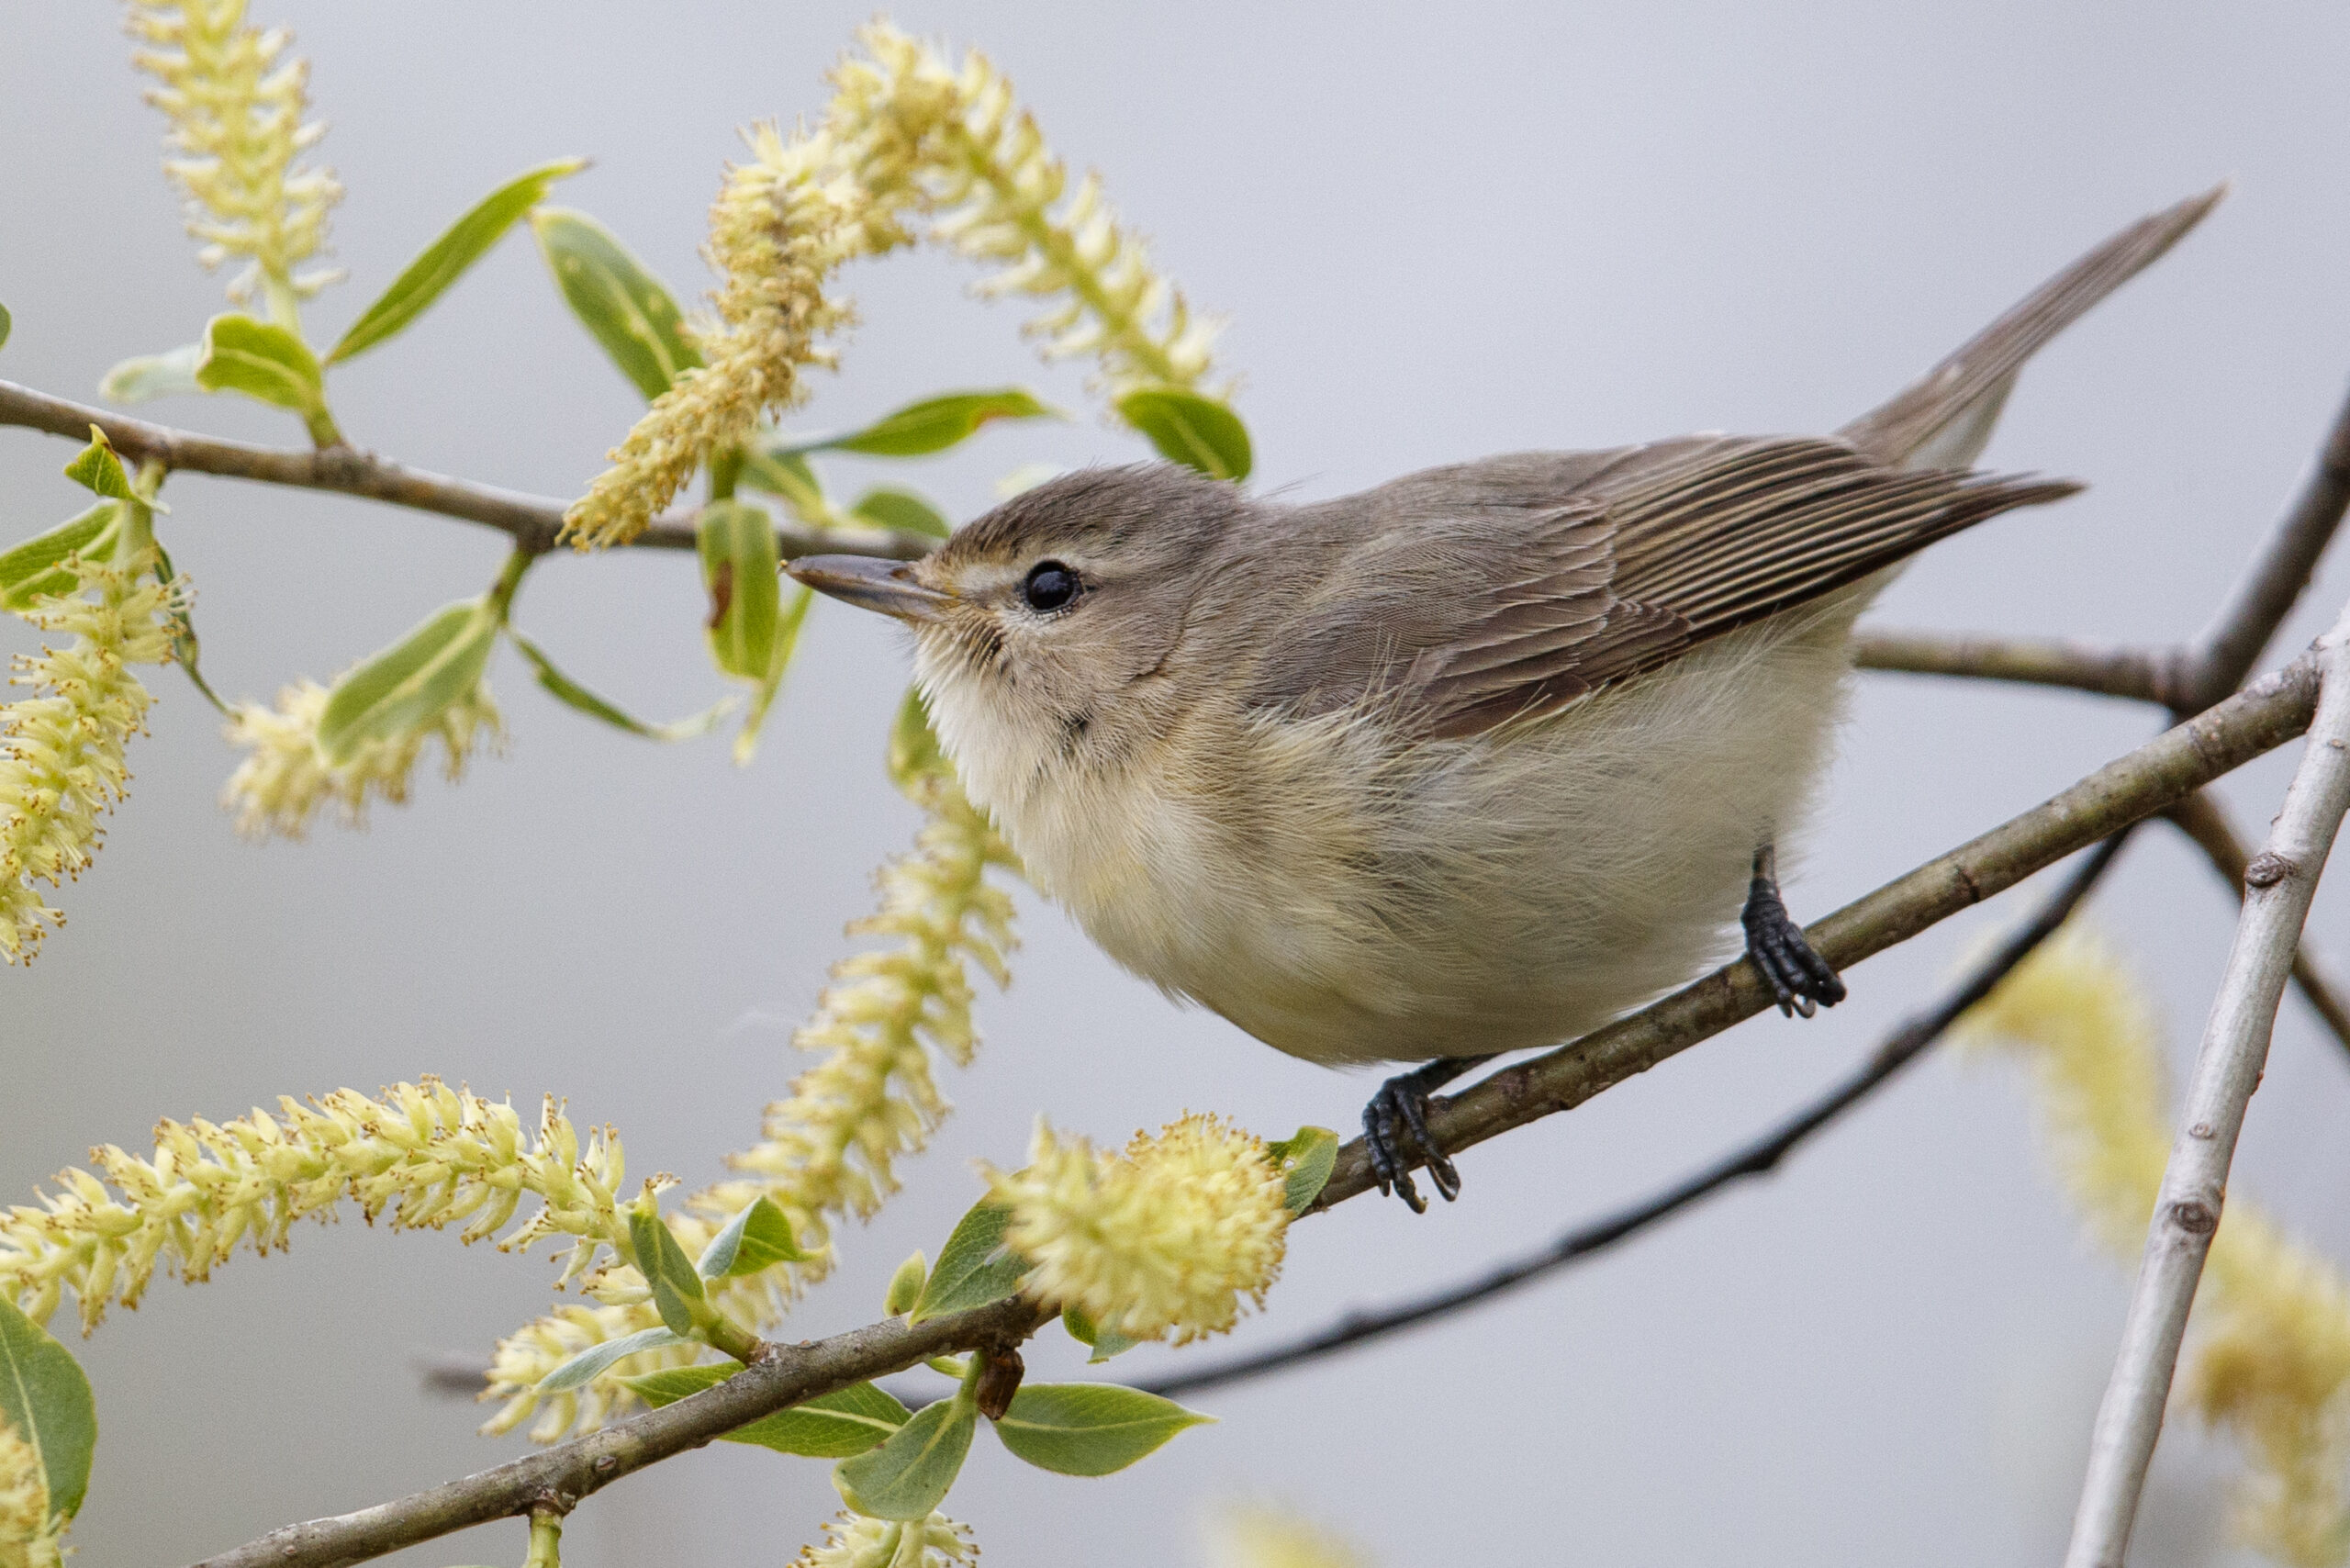 A songbird with drab brown above and white below with a thin eyeline perches on a branch surrounded by yellow catkins.